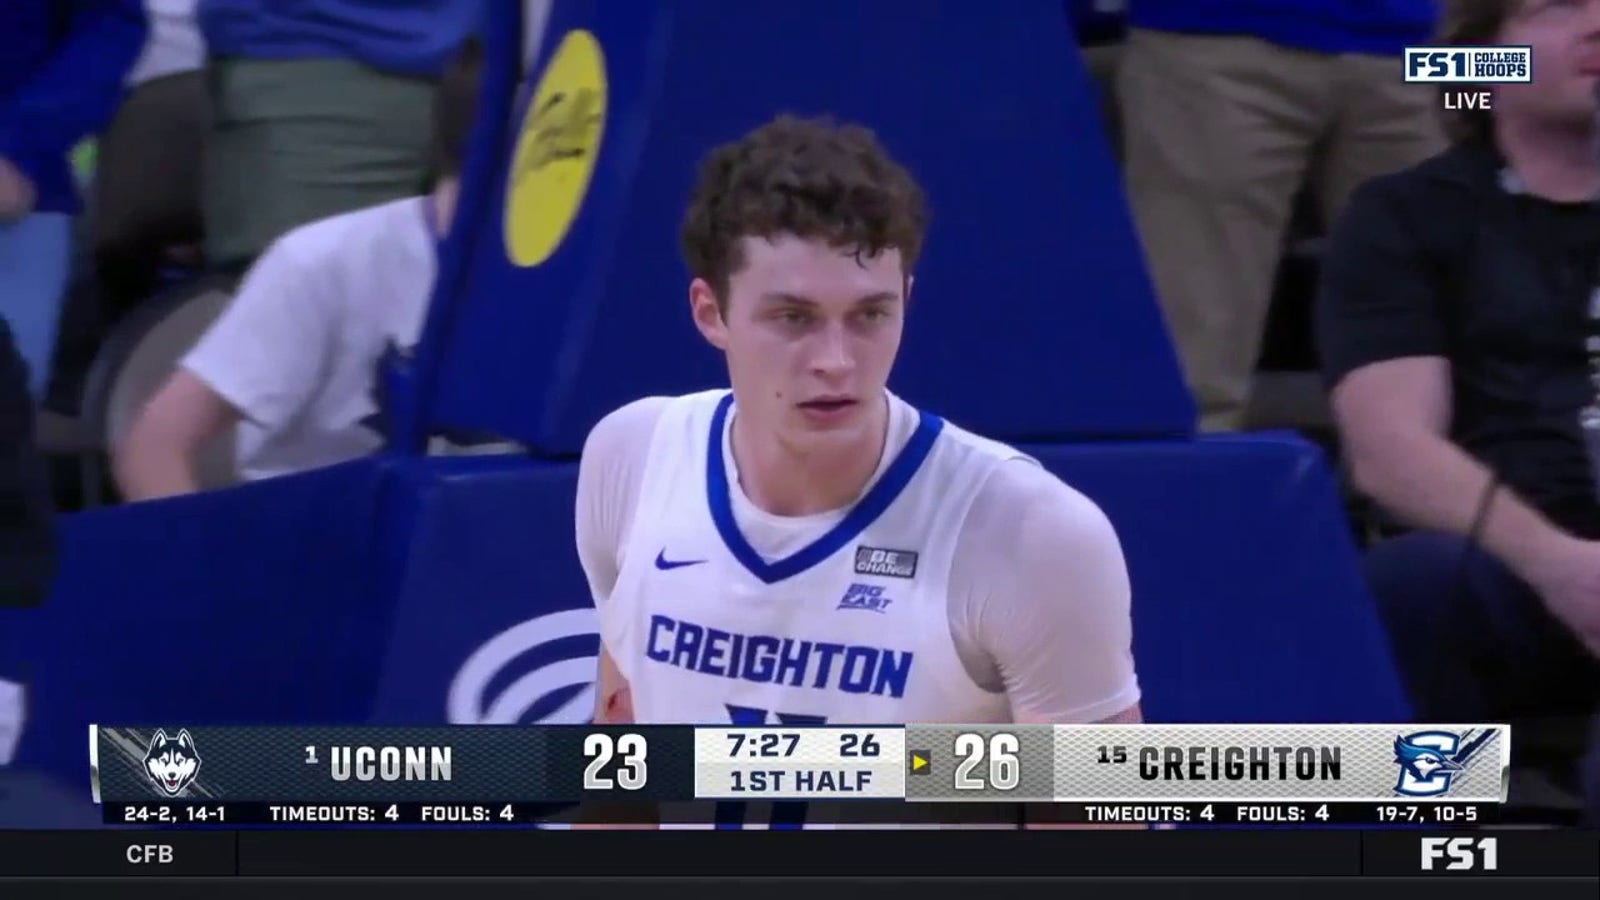 Creighton's Ryan Kalkbrenner records a block and follows with a dunk on the other end vs. UConn